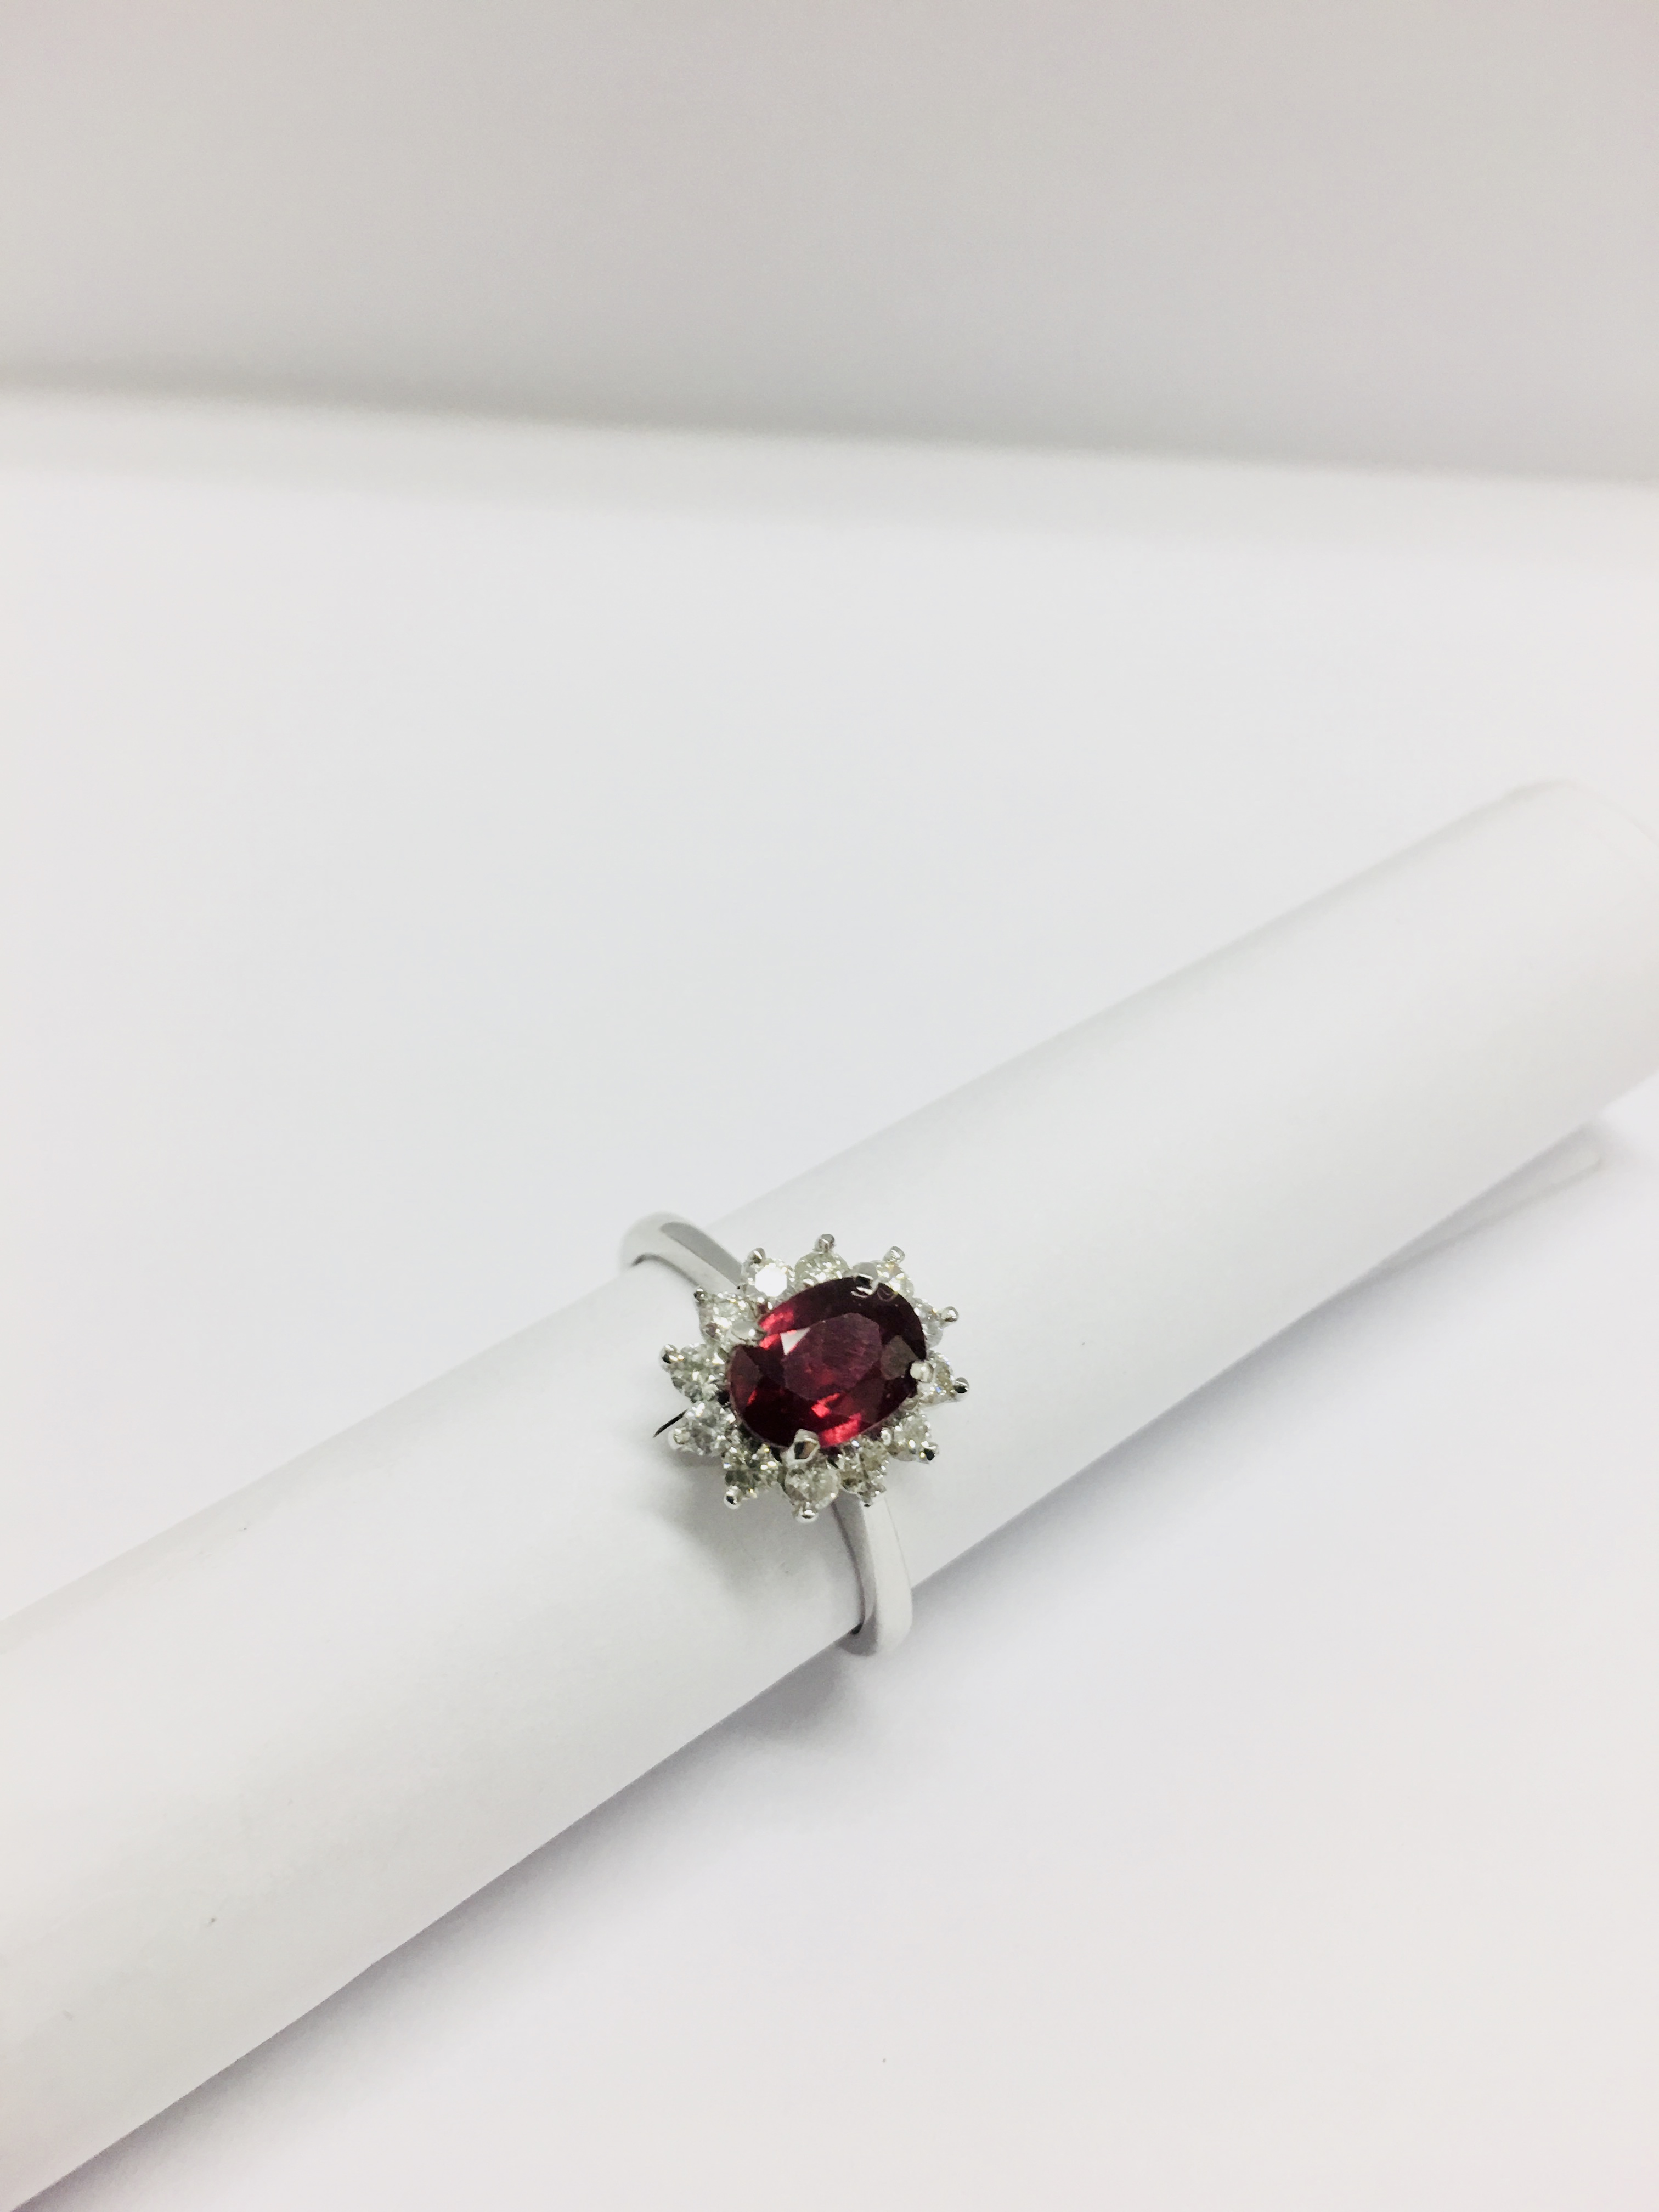 0.80Ct Ruby And Diamond Cluster Ring Set With A Oval Cut(Glass Filled) Ruby - Image 4 of 9